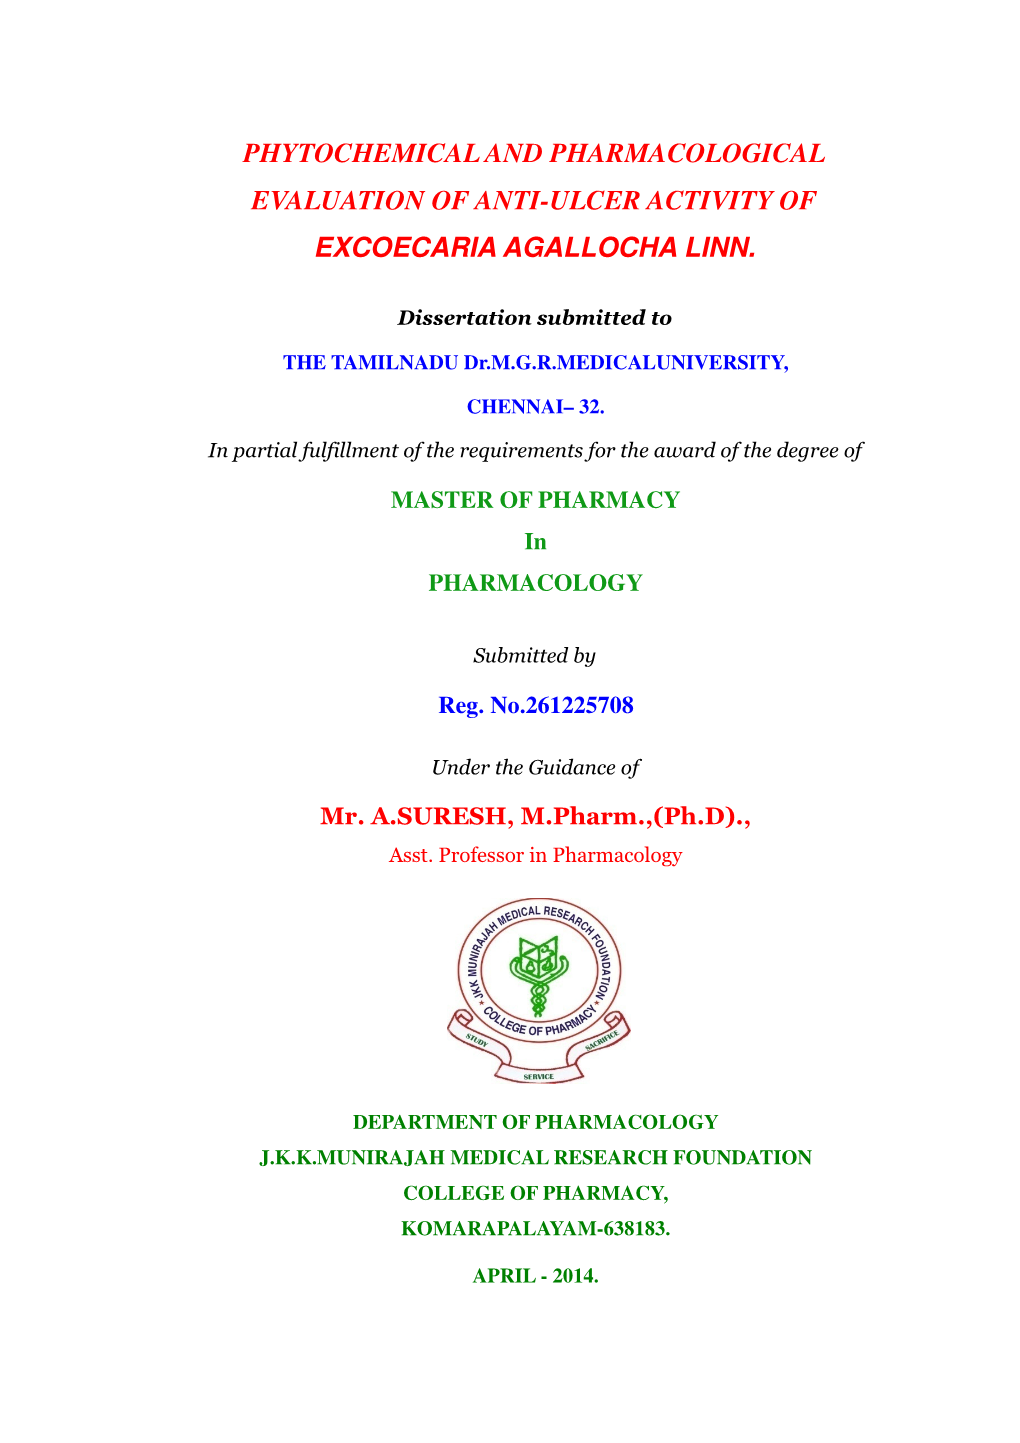 Phytochemical and Pharmacological Evaluation of Anti-Ulcer Activity of Excoecaria Agallocha Linn